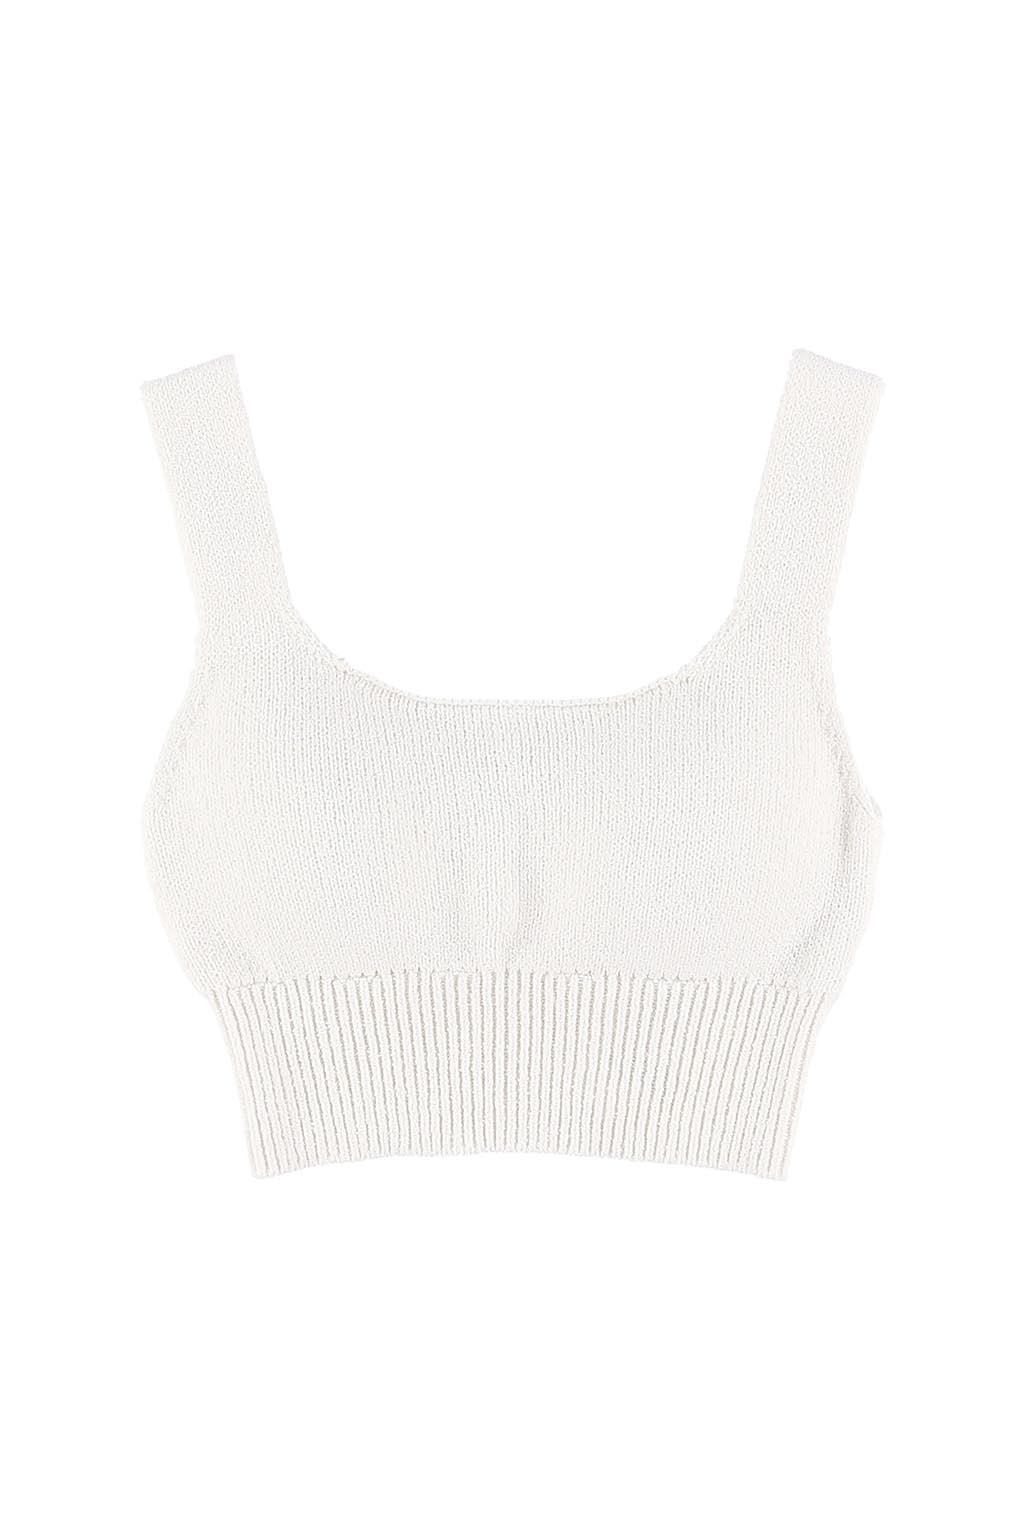 padded-knit-tank-top-white-02